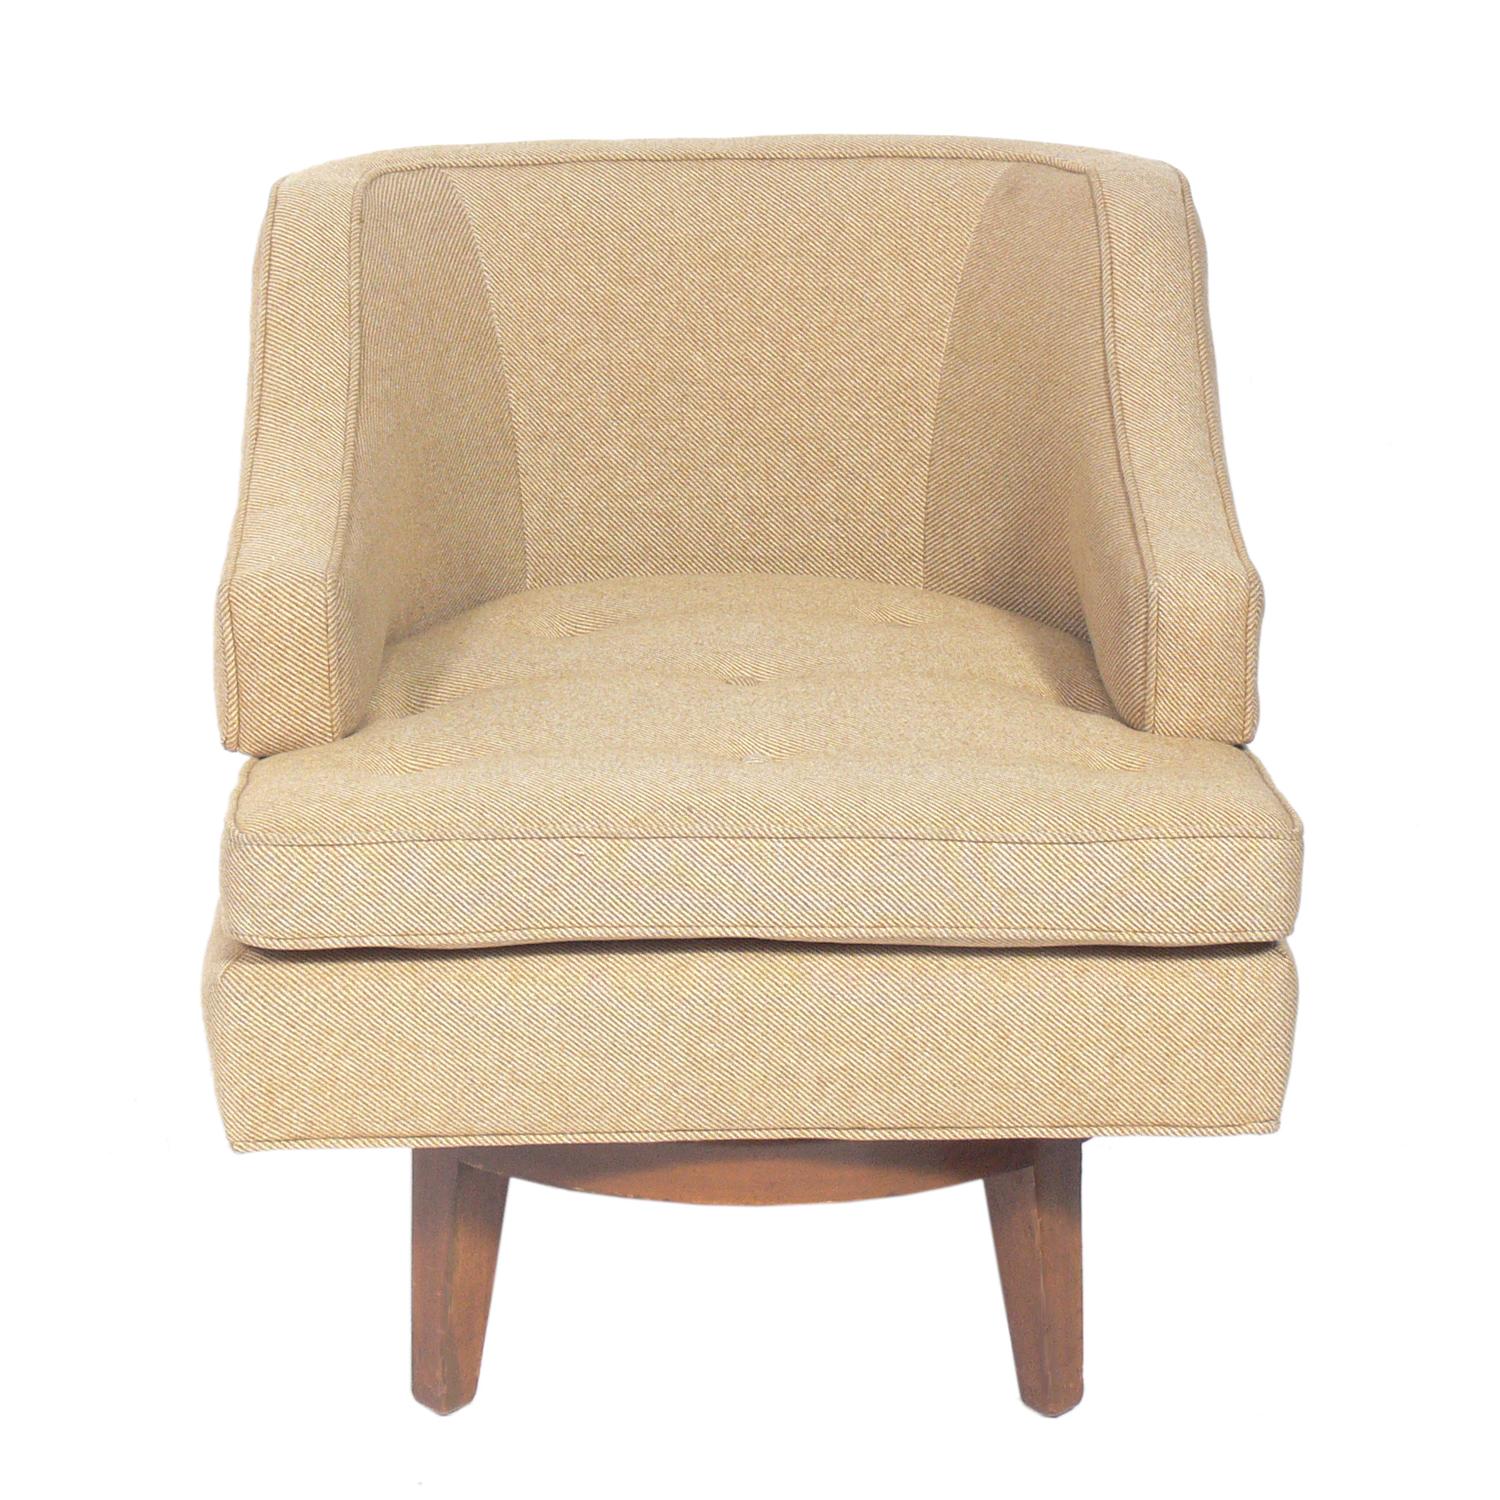 Curvaceous swivel lounge chair, designed by Edward Wormley for Dunbar, American, circa 1950s. This piece is currently being refinished and reupholstered and can be reupholstered in your fabric and refinished in your choice of color. The price noted